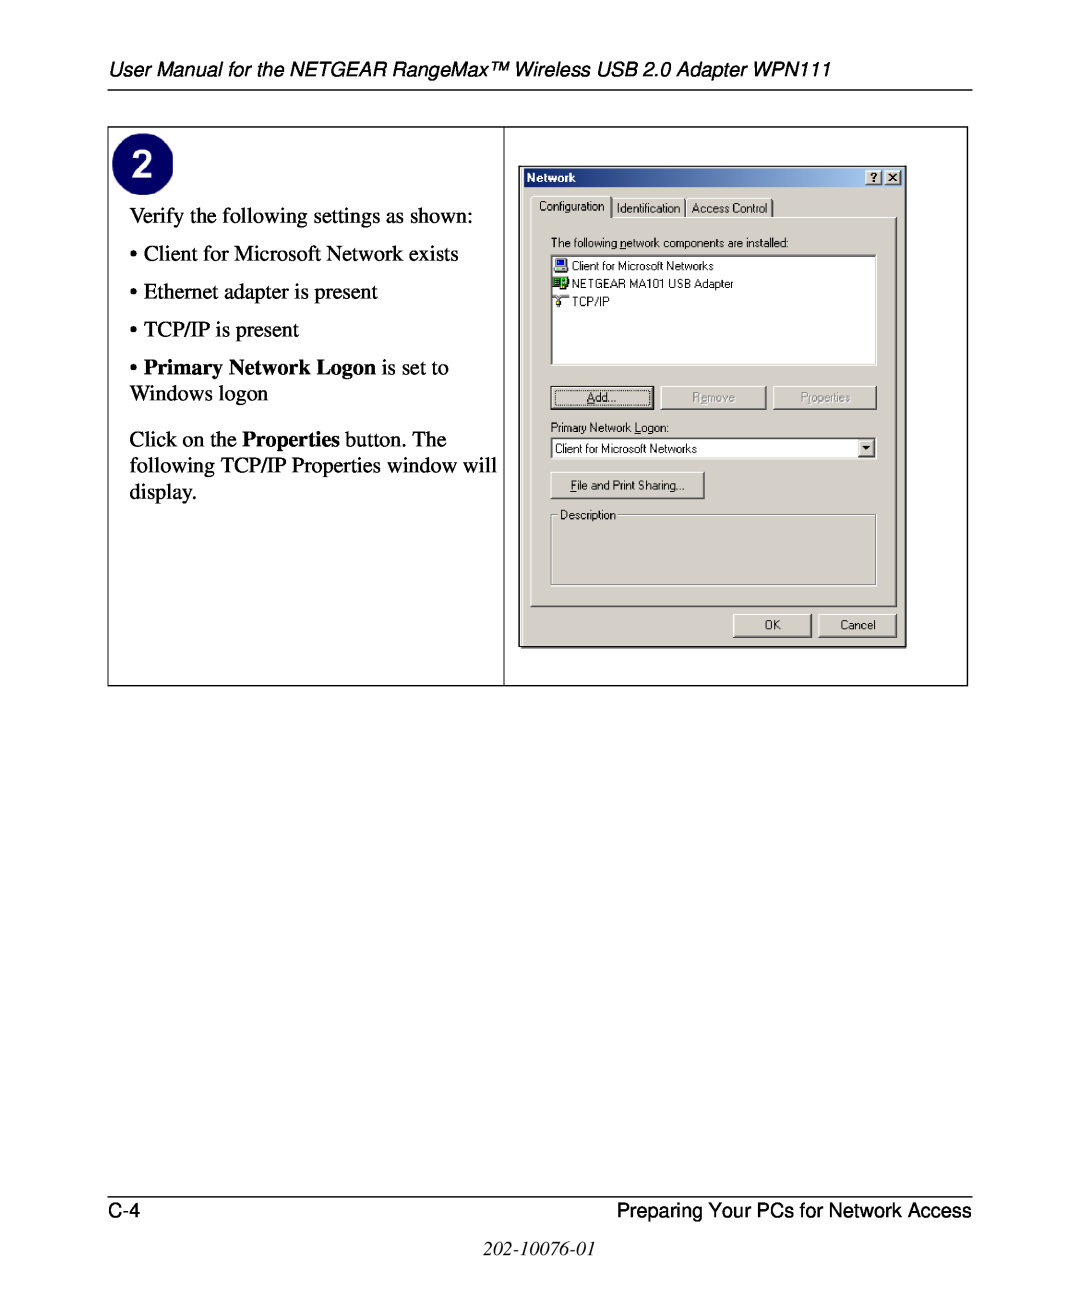 NETGEAR WPN111 Verify the following settings as shown, Client for Microsoft Network exists Ethernet adapter is present 